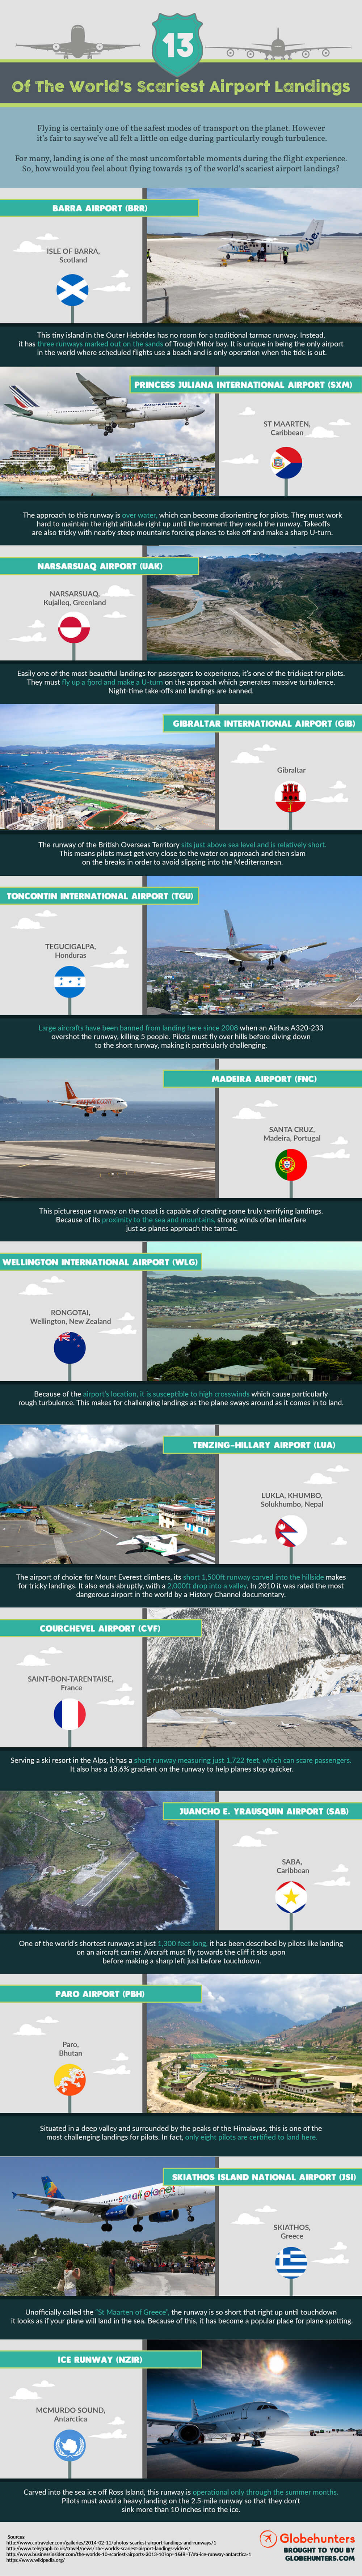 13 Of The Scariest Airport Landings In the World Infographic